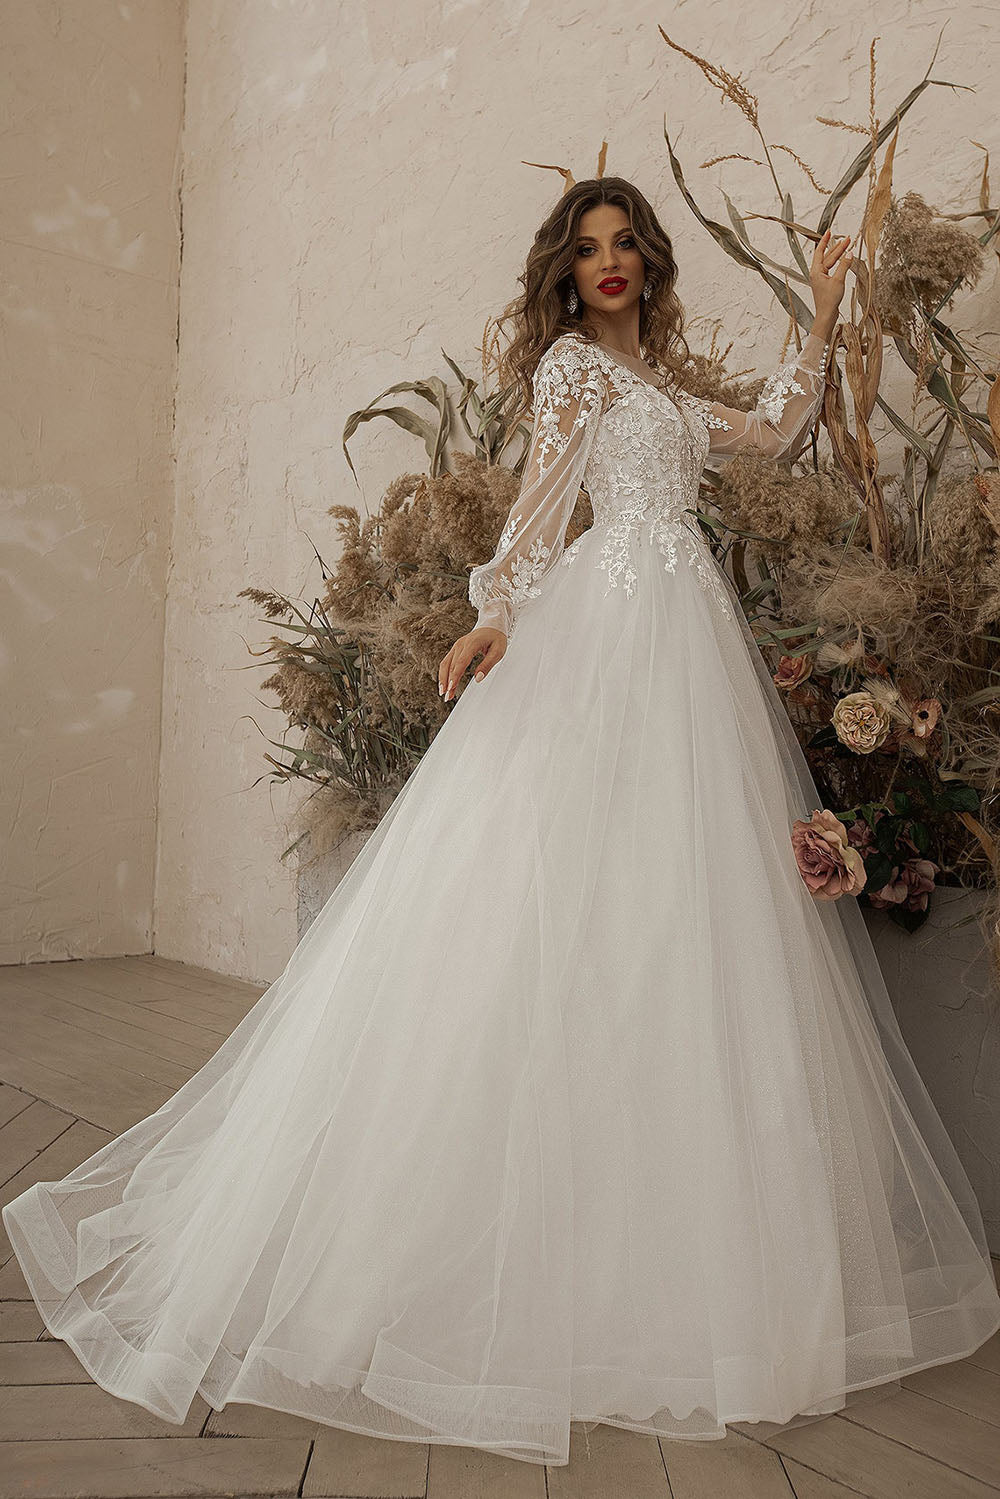 Cinessd Back to school outfit Wedding Dress 2022 For Women Lace Wedding Gowns Appliques For Bridal Dress Elegant Tullle Gown  Robe De Mariée Customize Made